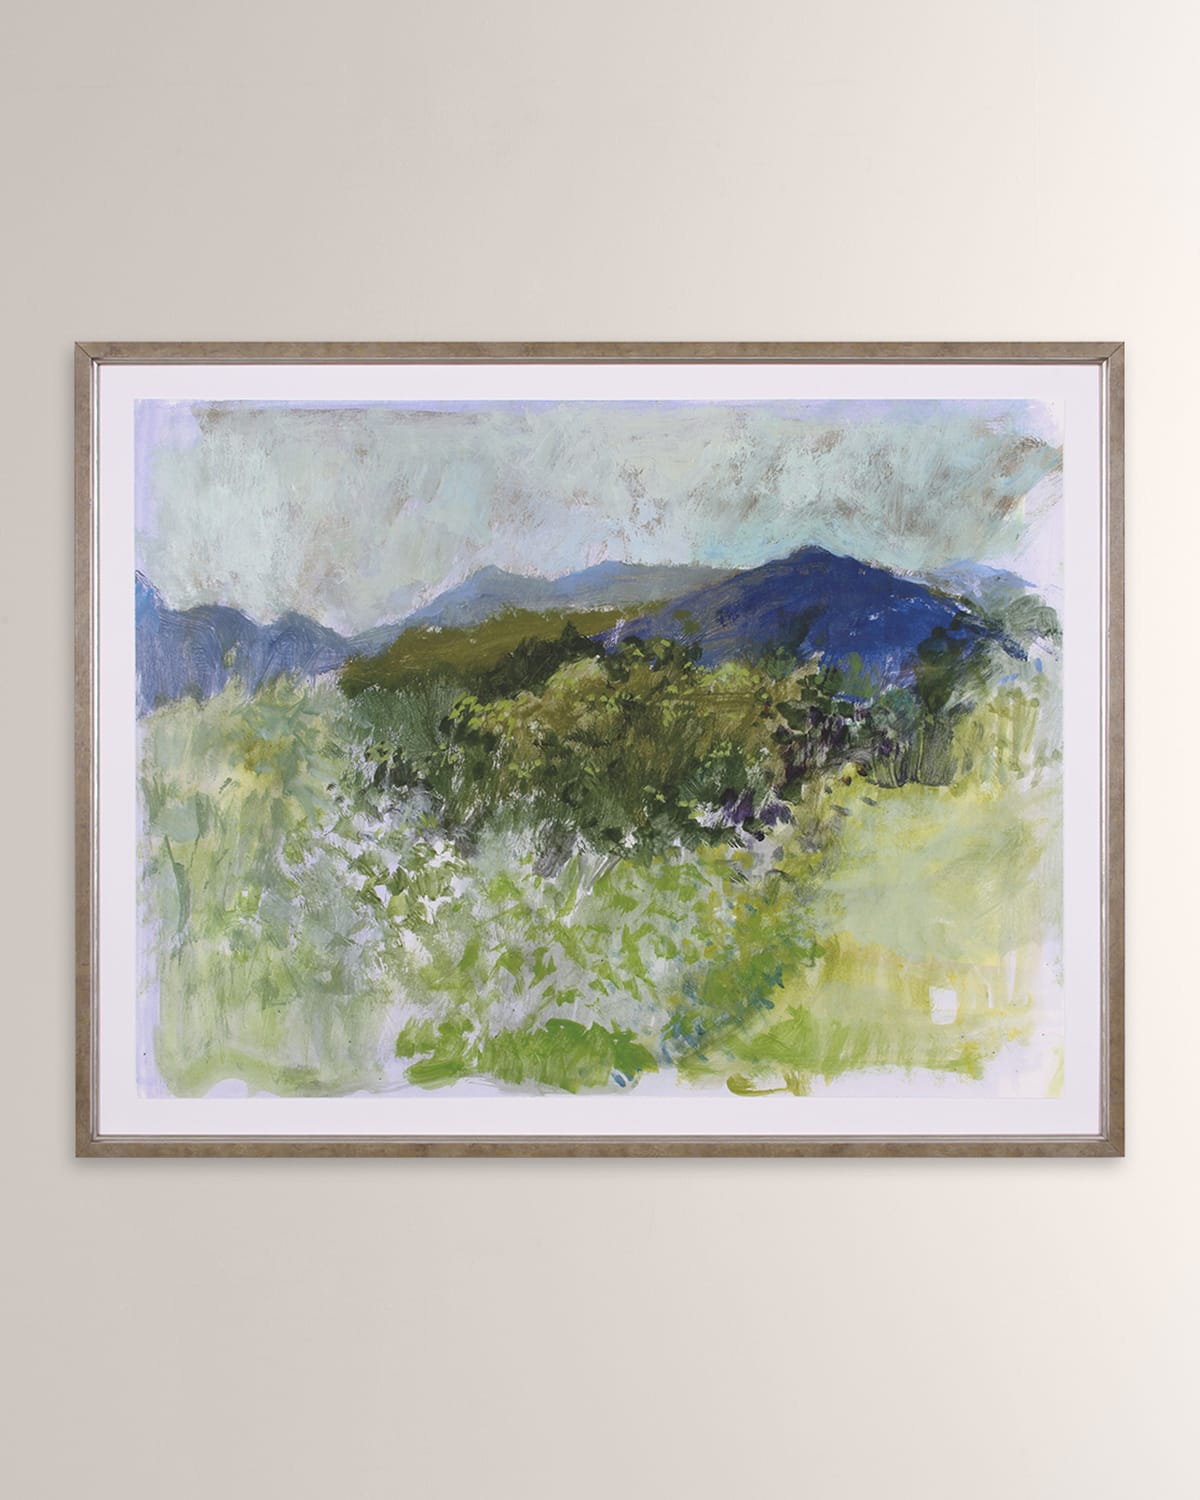 Shadow Catchers Verde Mountain View Giclee On Paper, 54" X 42"